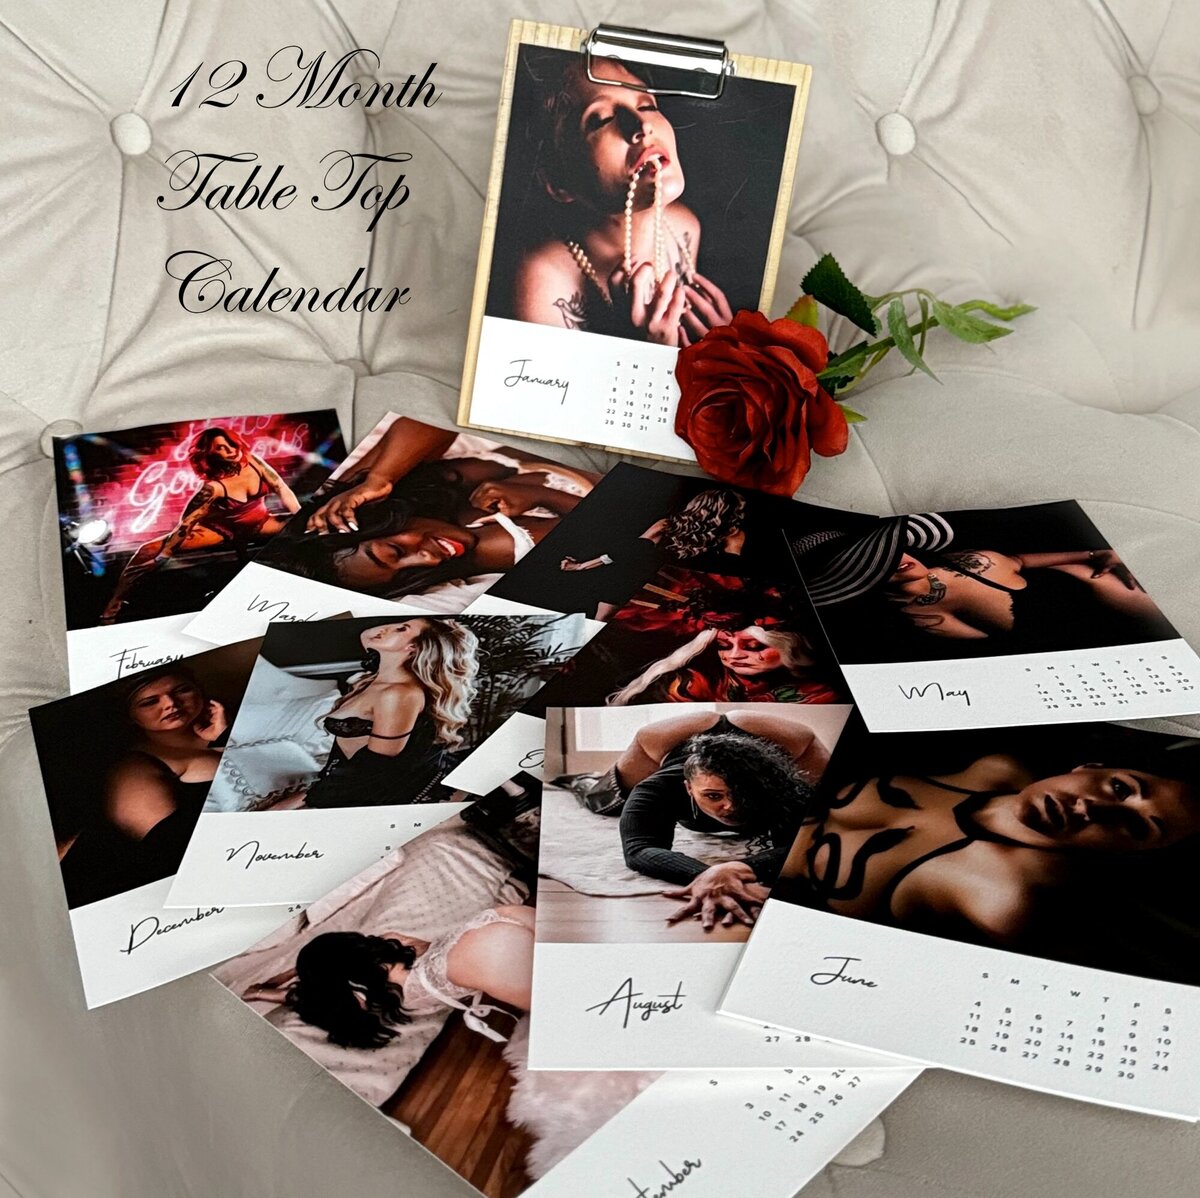 12 month table top calendar with 12 loose image prints of various women in lingerie